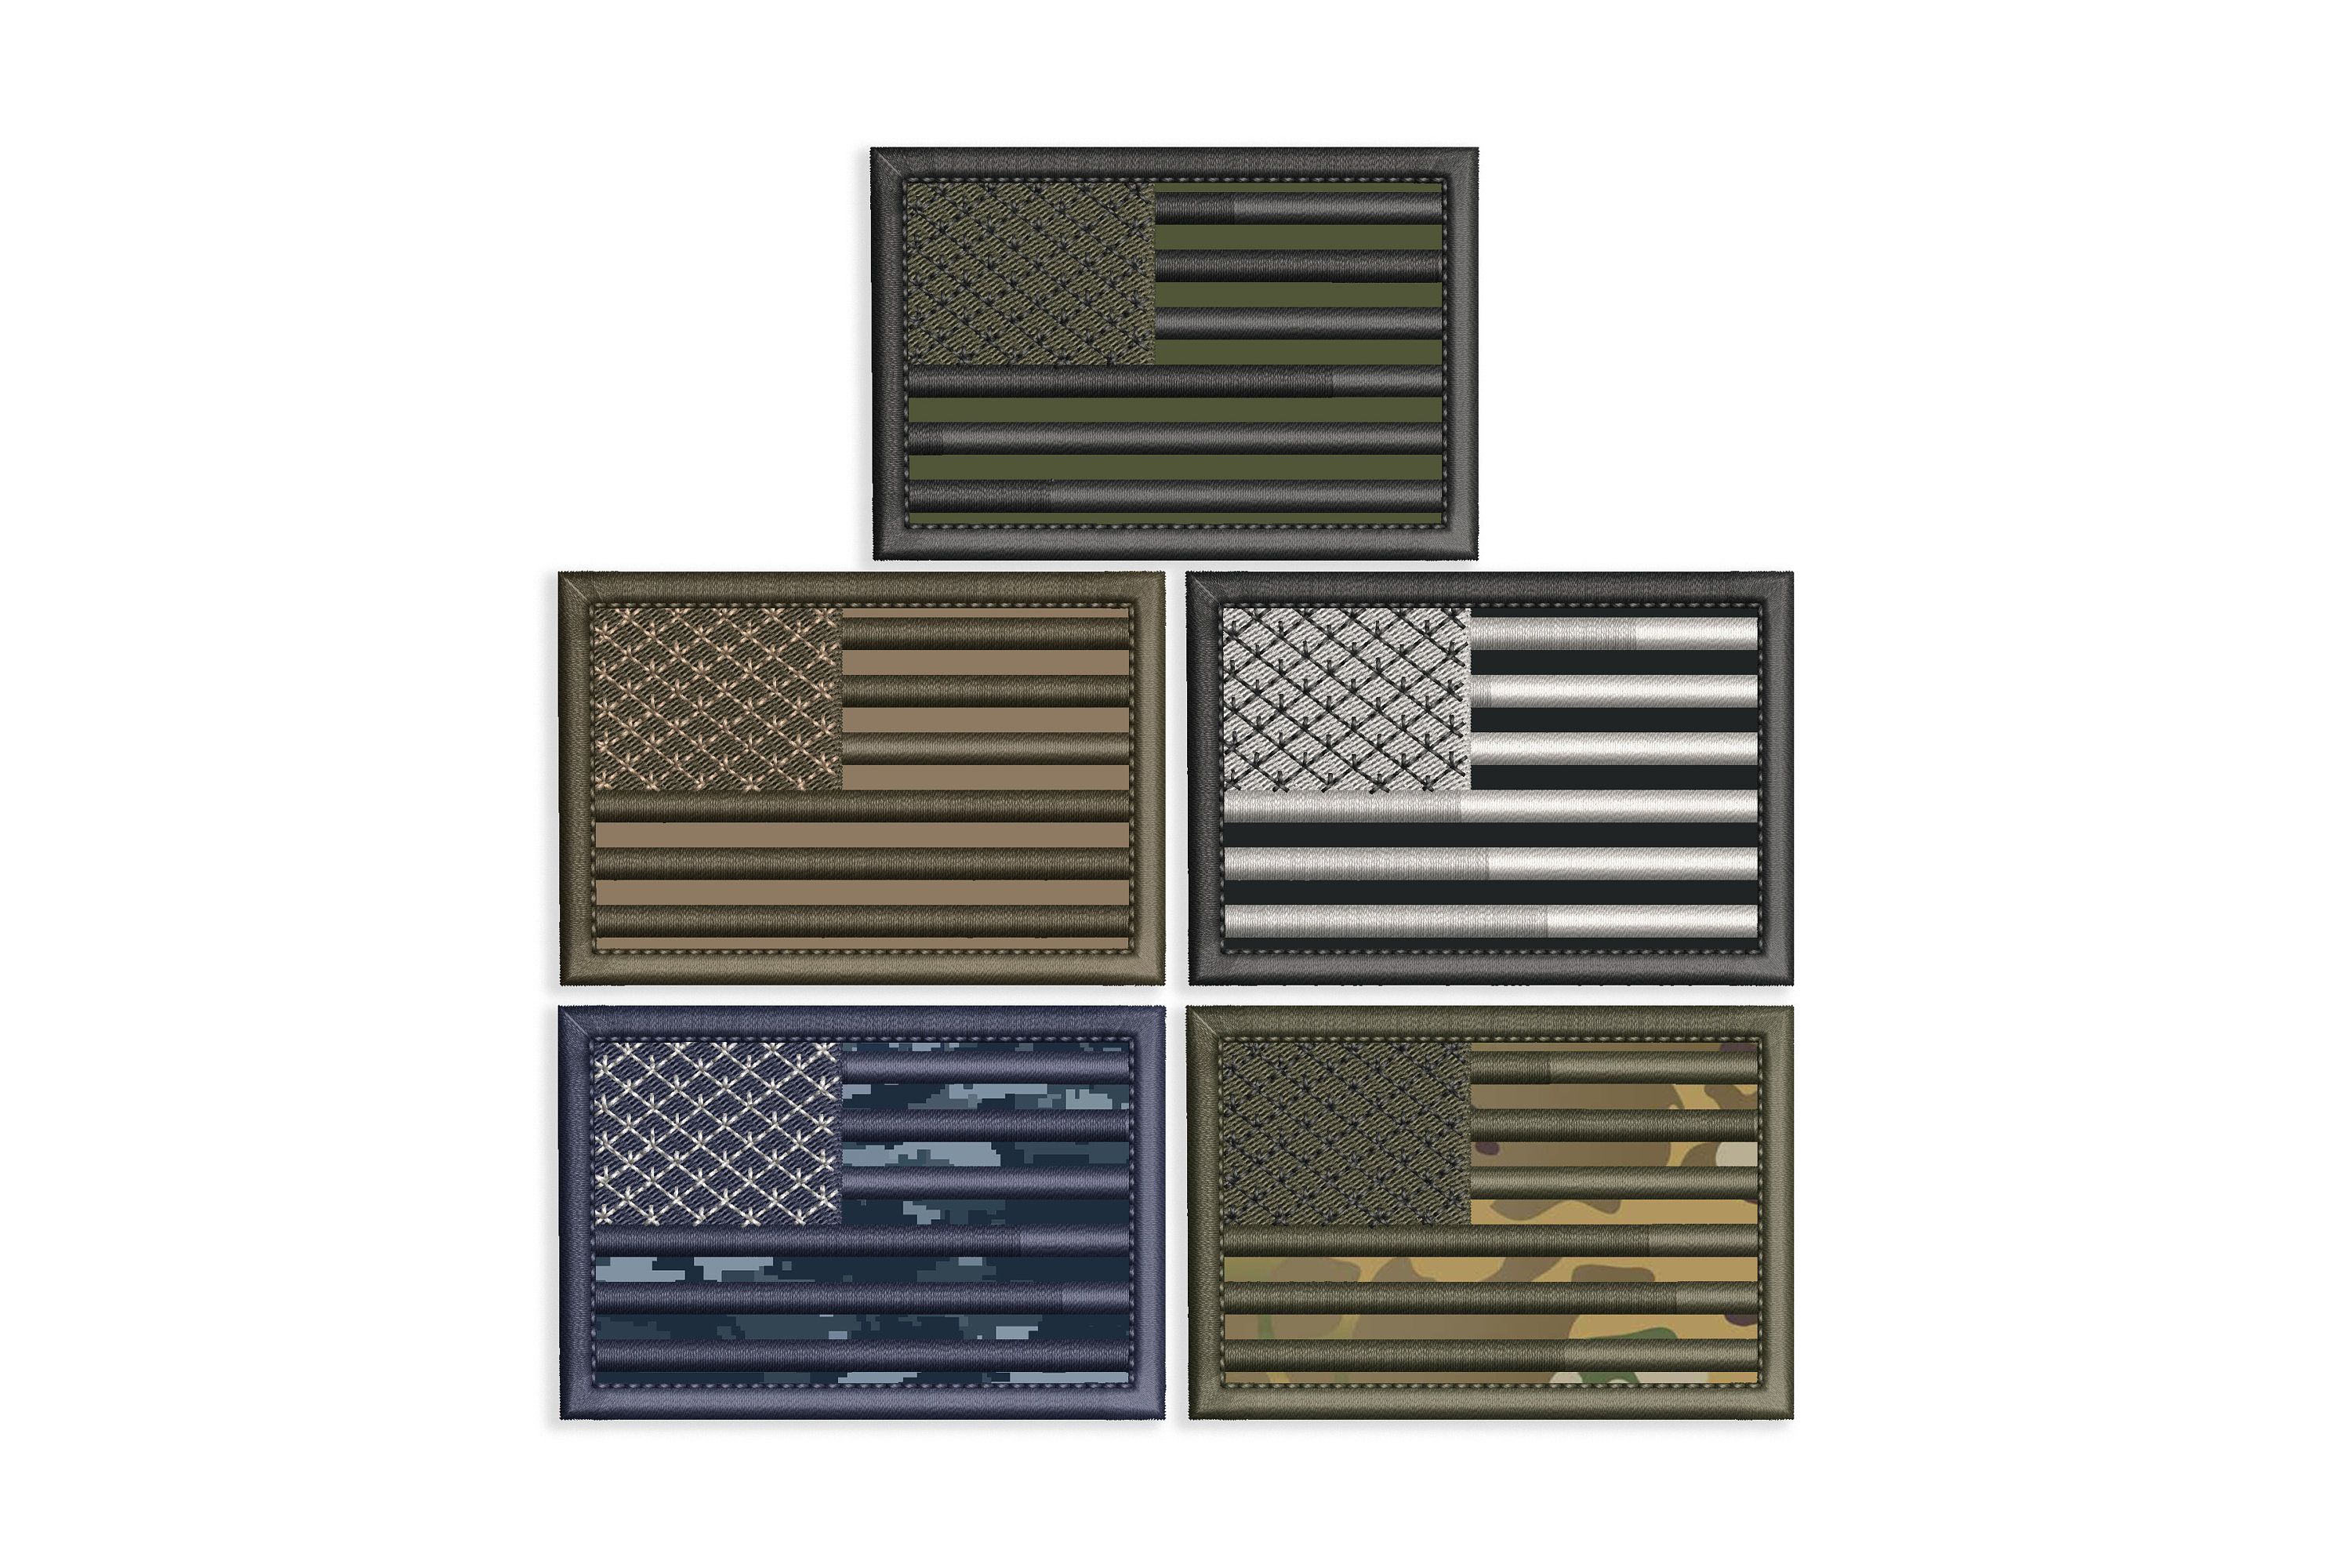 American Flag - Removable Patch